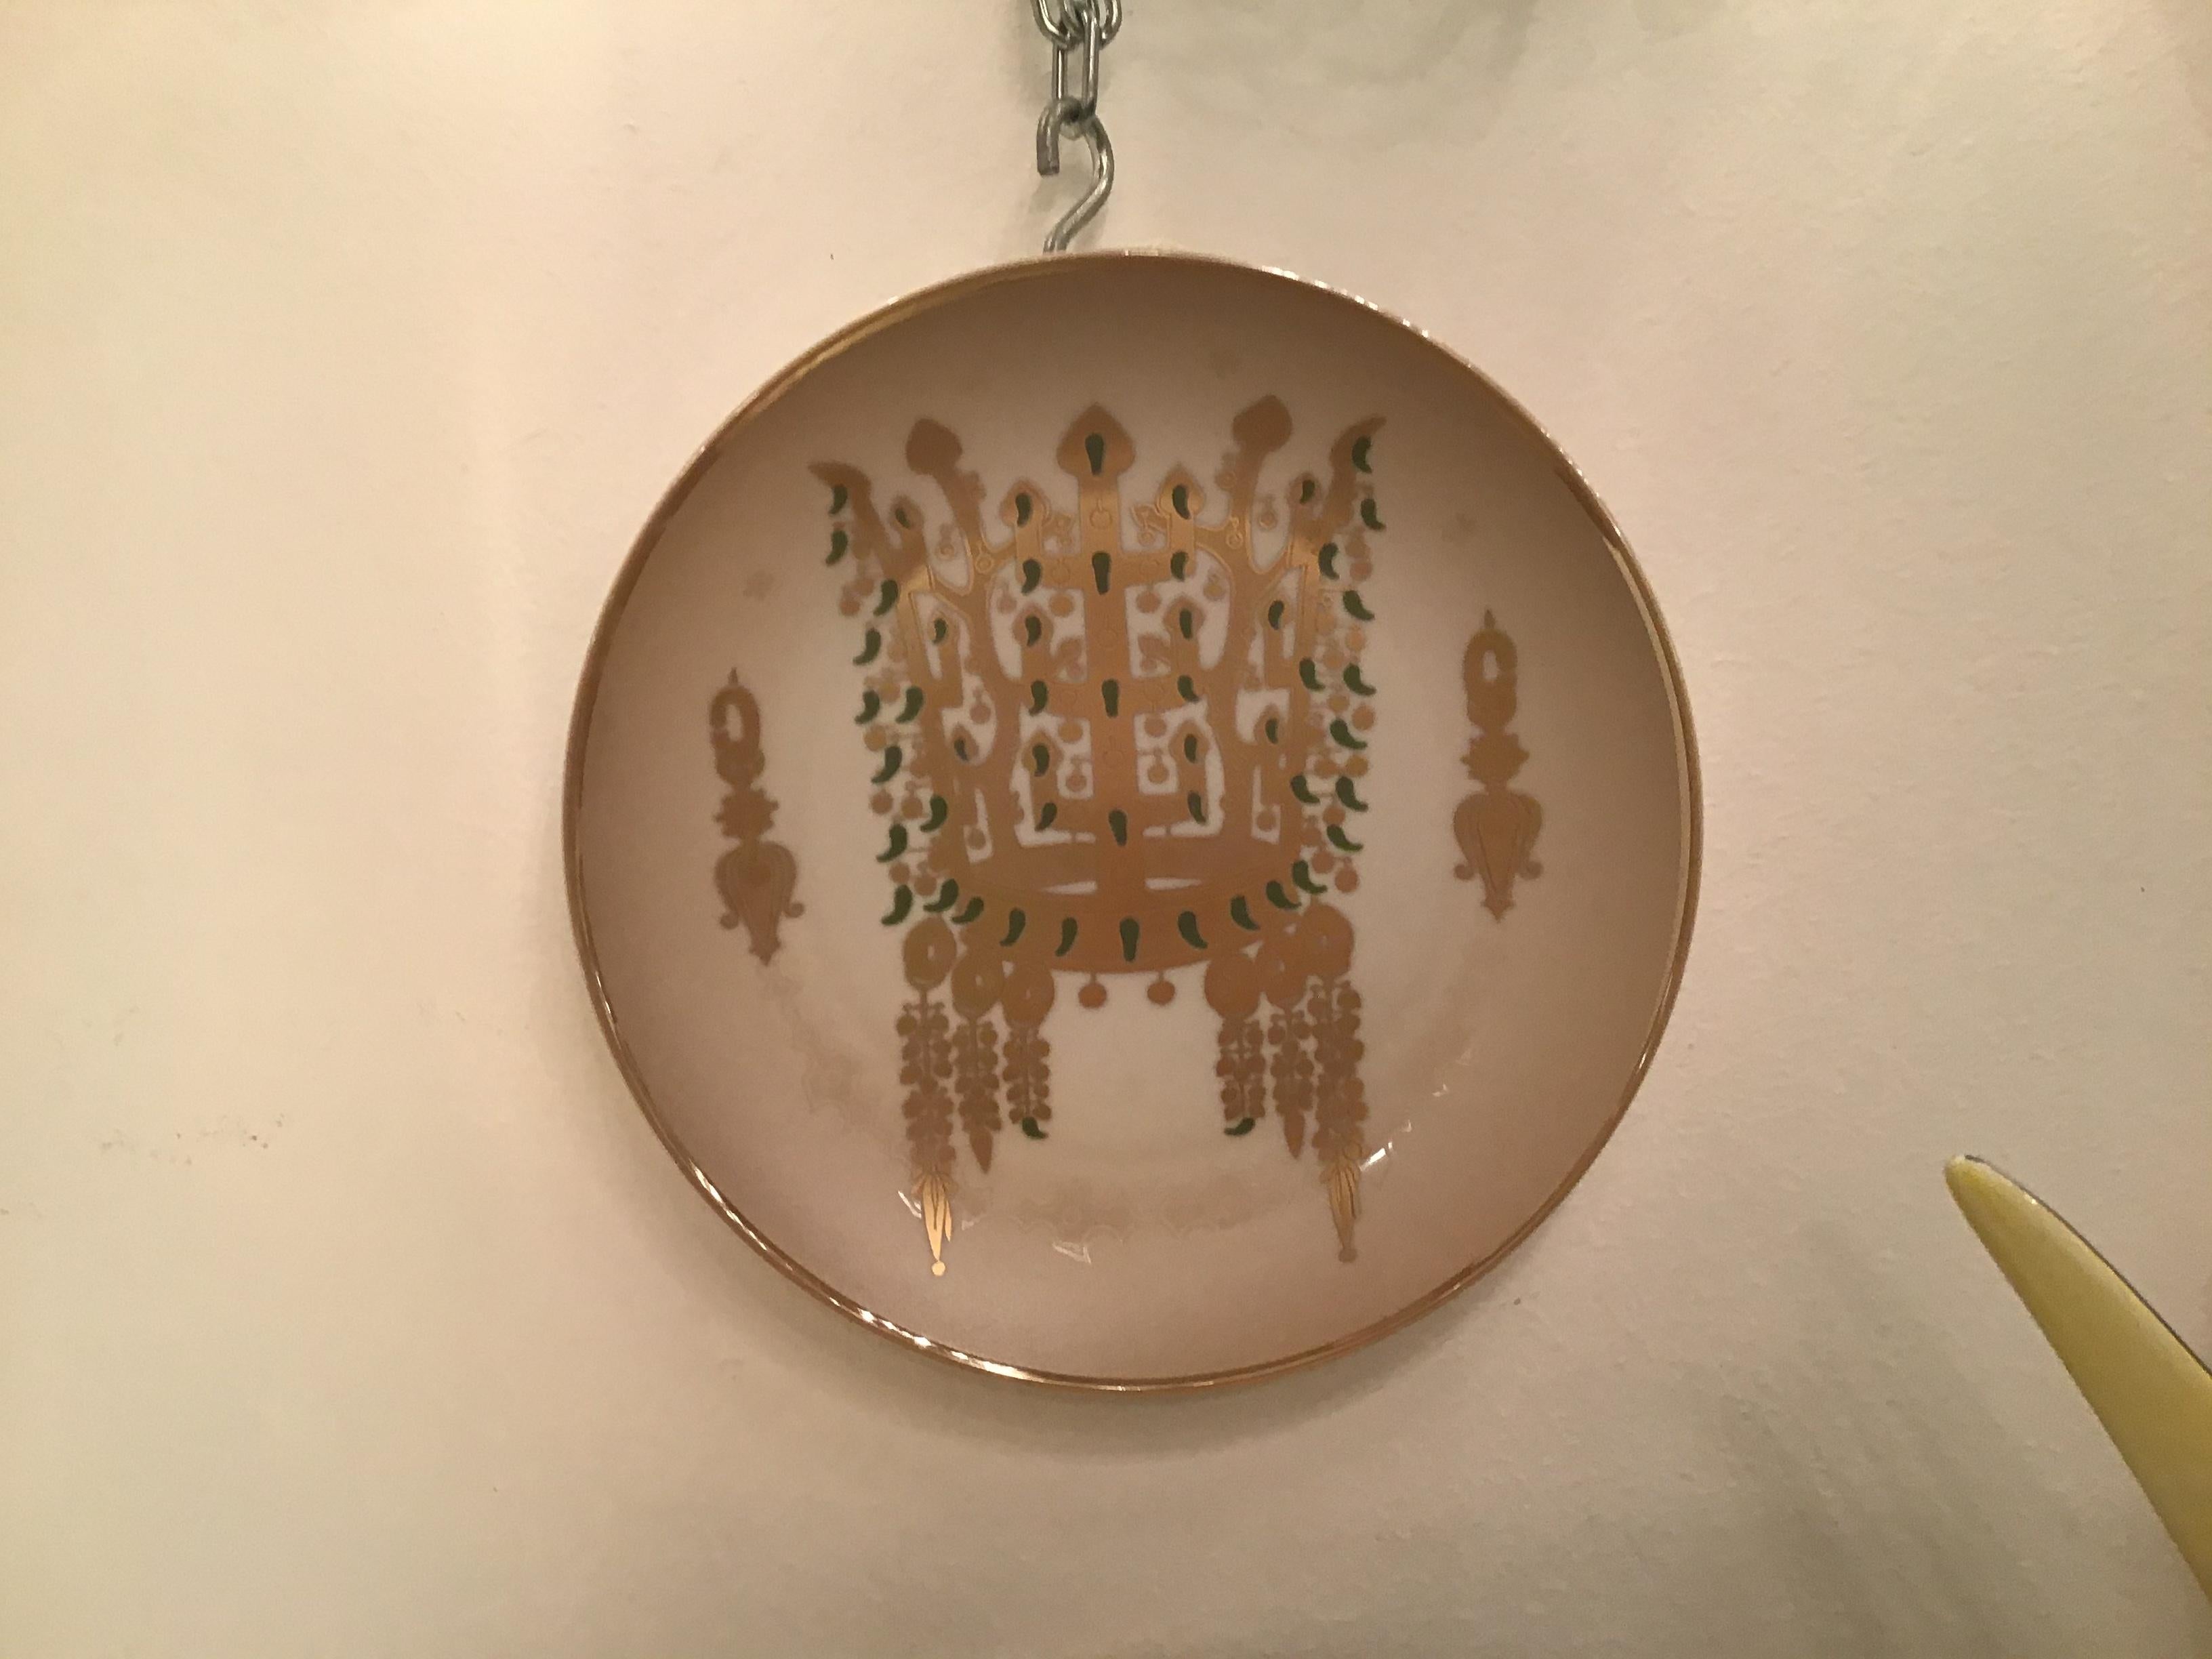 Morbelli Porcelain “Dinastia Silla” Wall Plates Worked with Pure Gold 1960 Italy For Sale 7